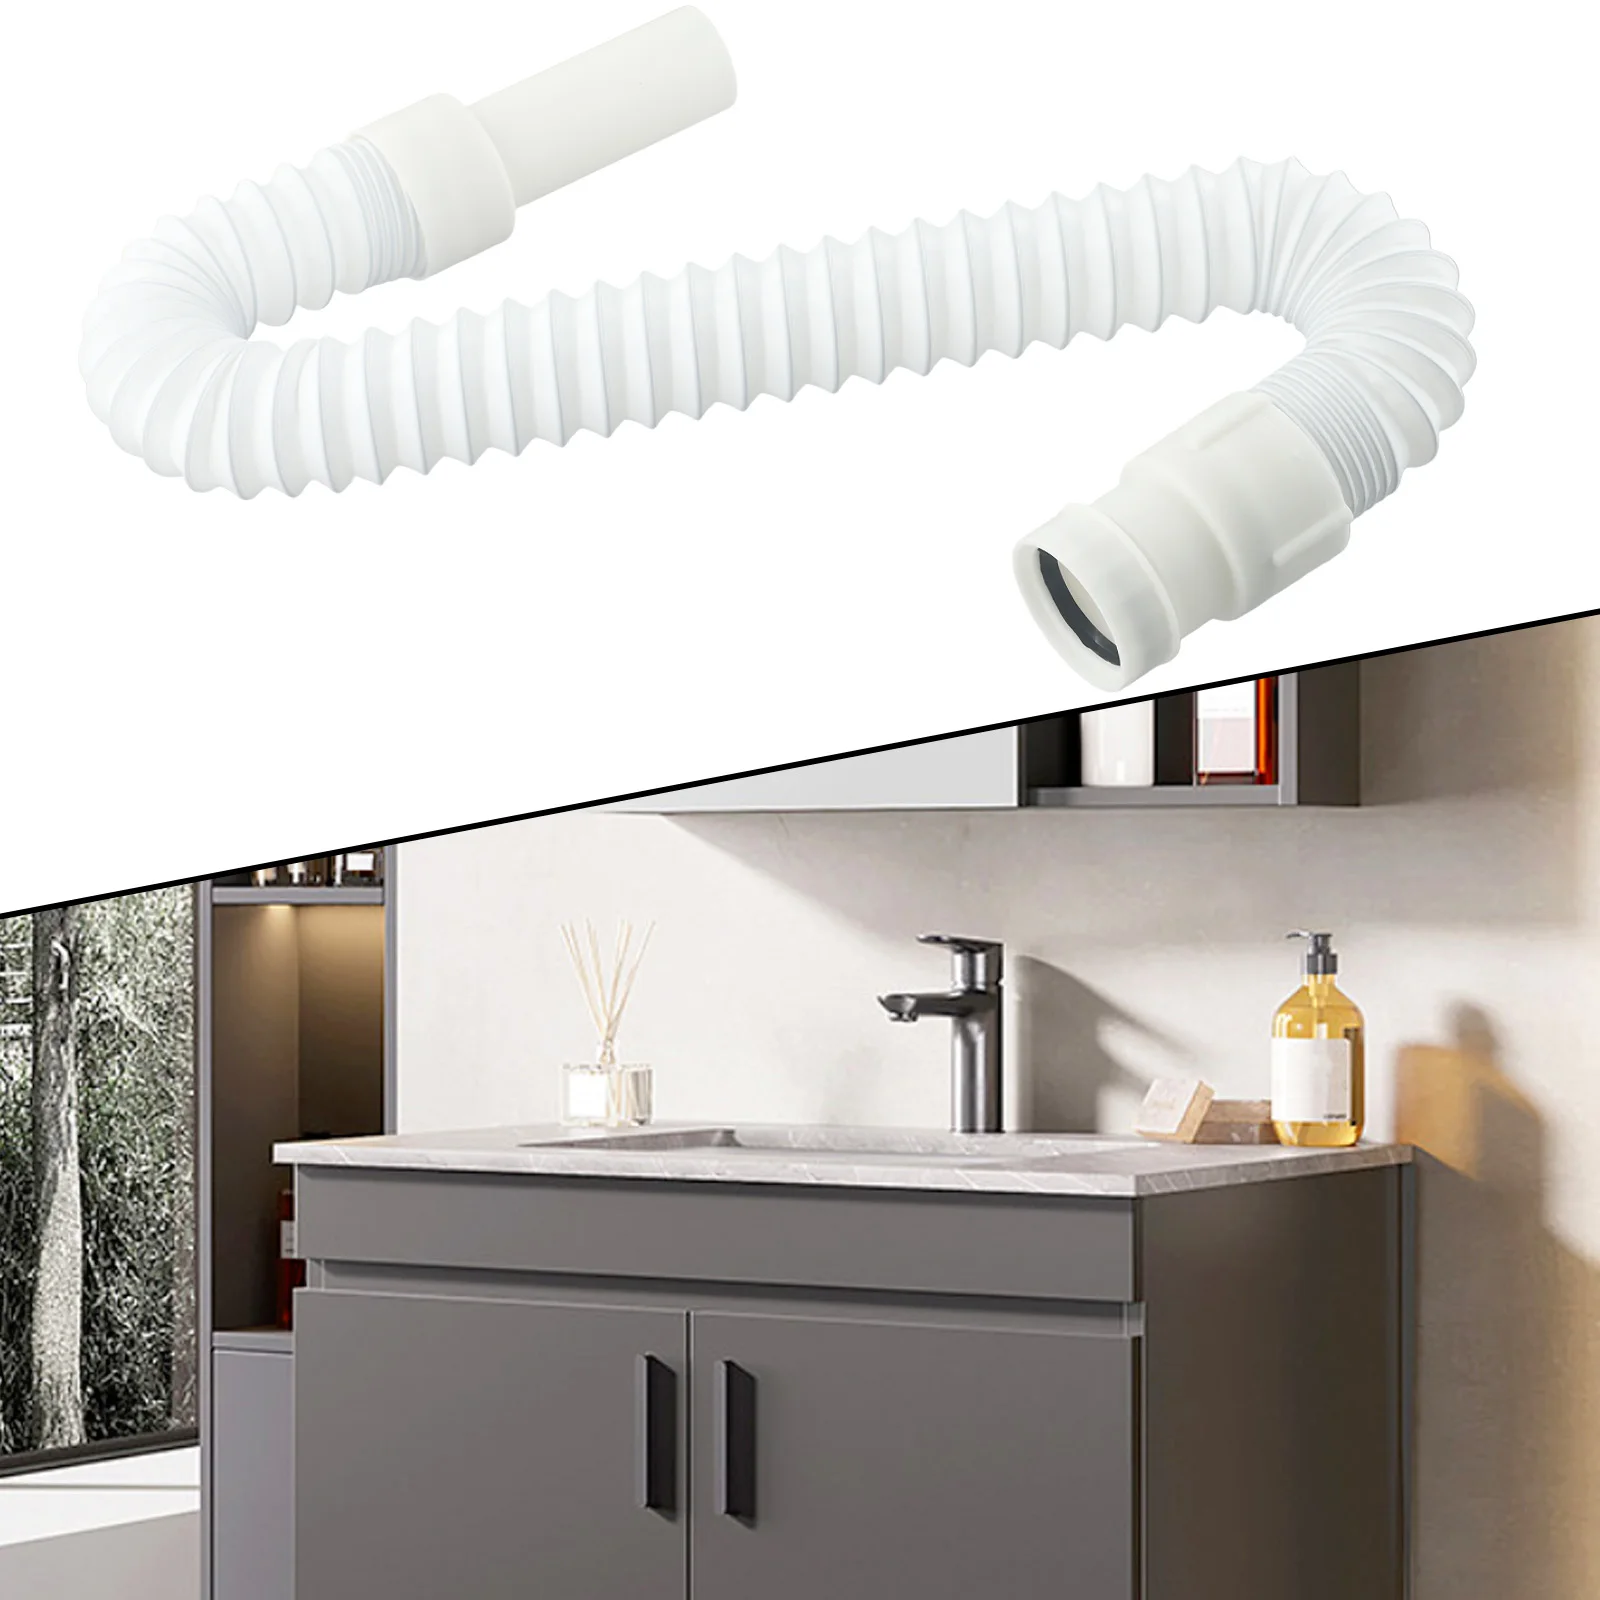 Trap Connector Kitchen Syphon Hand Tighten To Install It High Strength Sink Flexible Waste Pipe Solid Connection